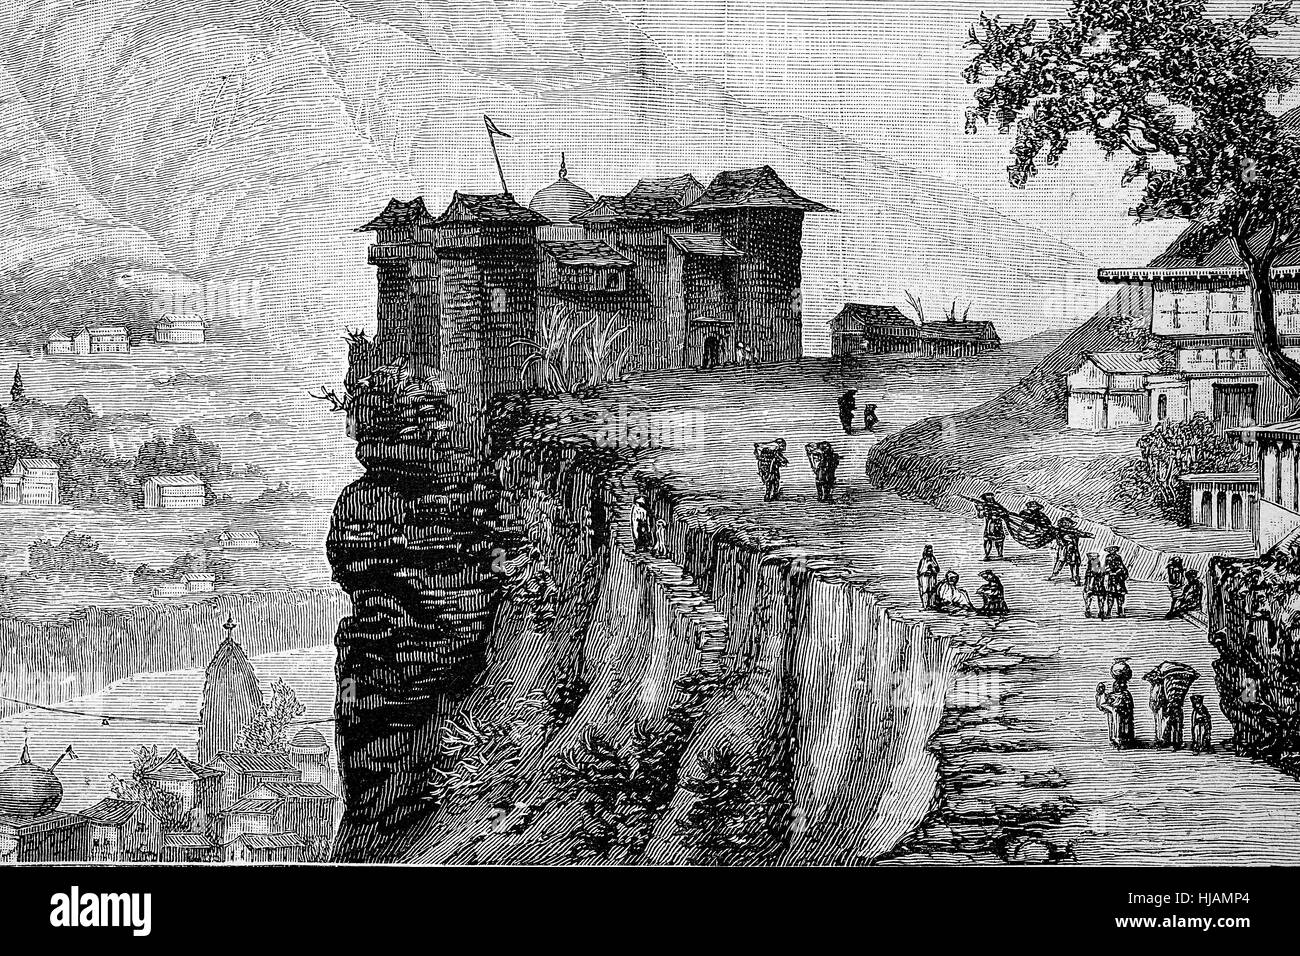 the village of Rampur, the city of the Rama, Himalaya, India, historical image or illustration from the year 1894, digital improved Stock Photo